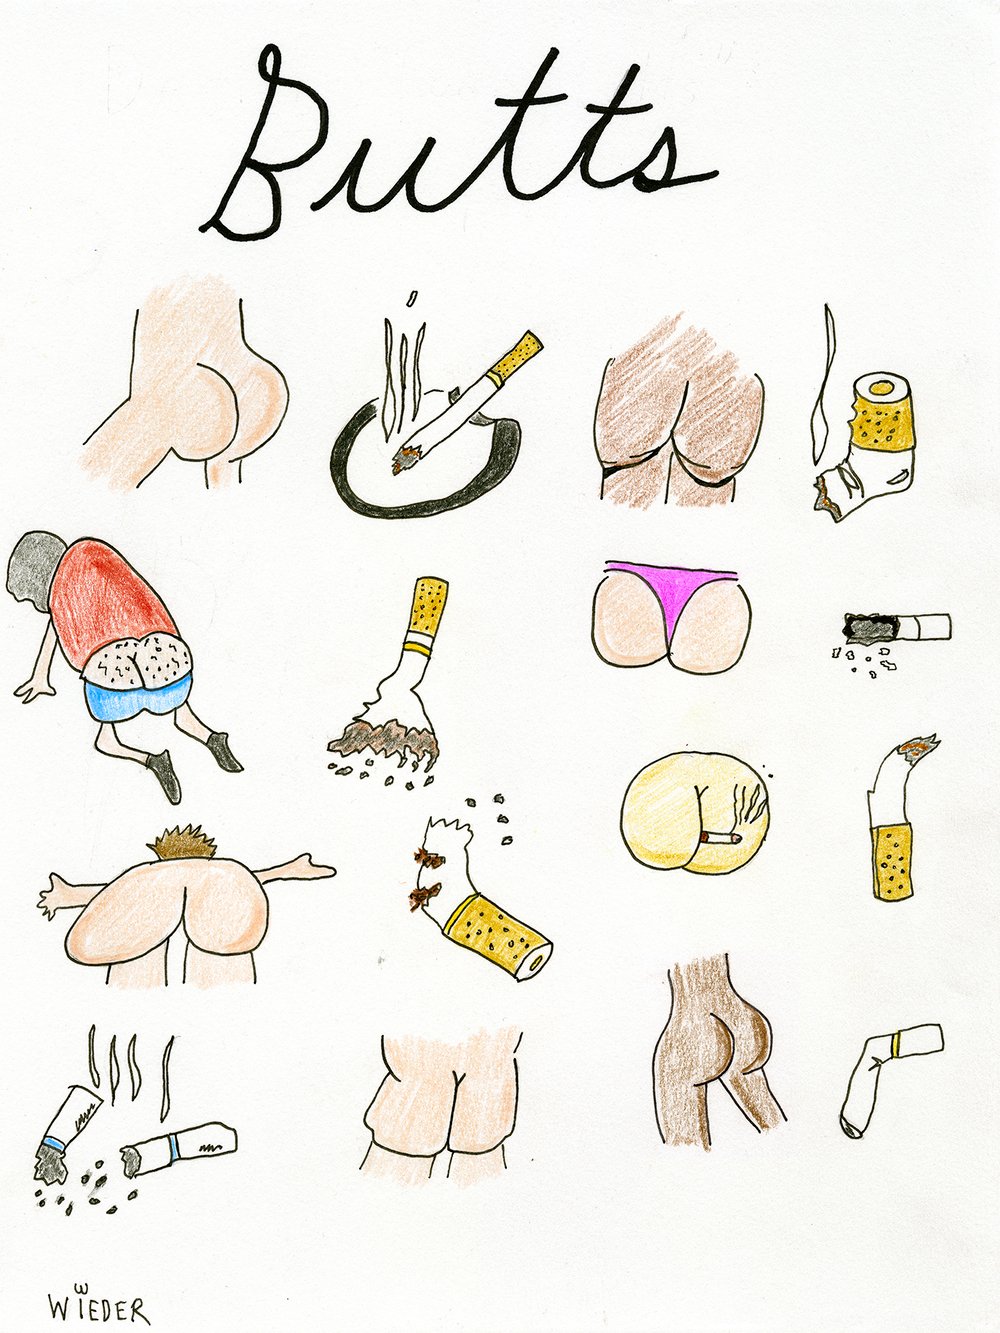 Image of "Butts"